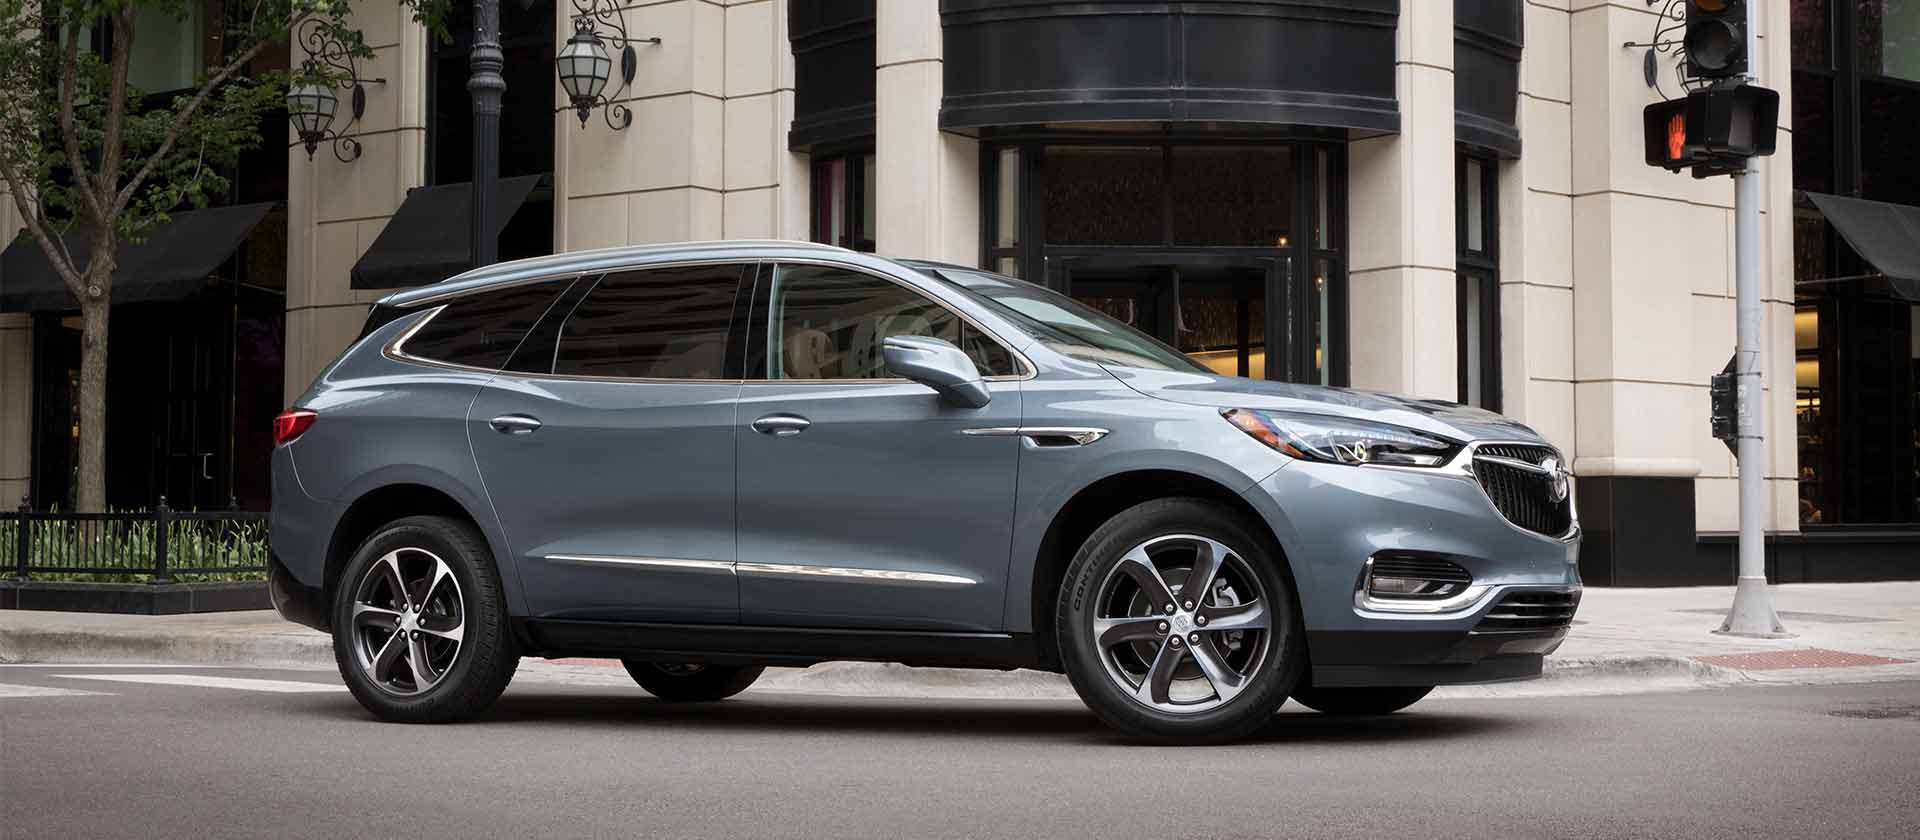 2018 Buick Enclave Technology Features Preview In Youngstown Oh